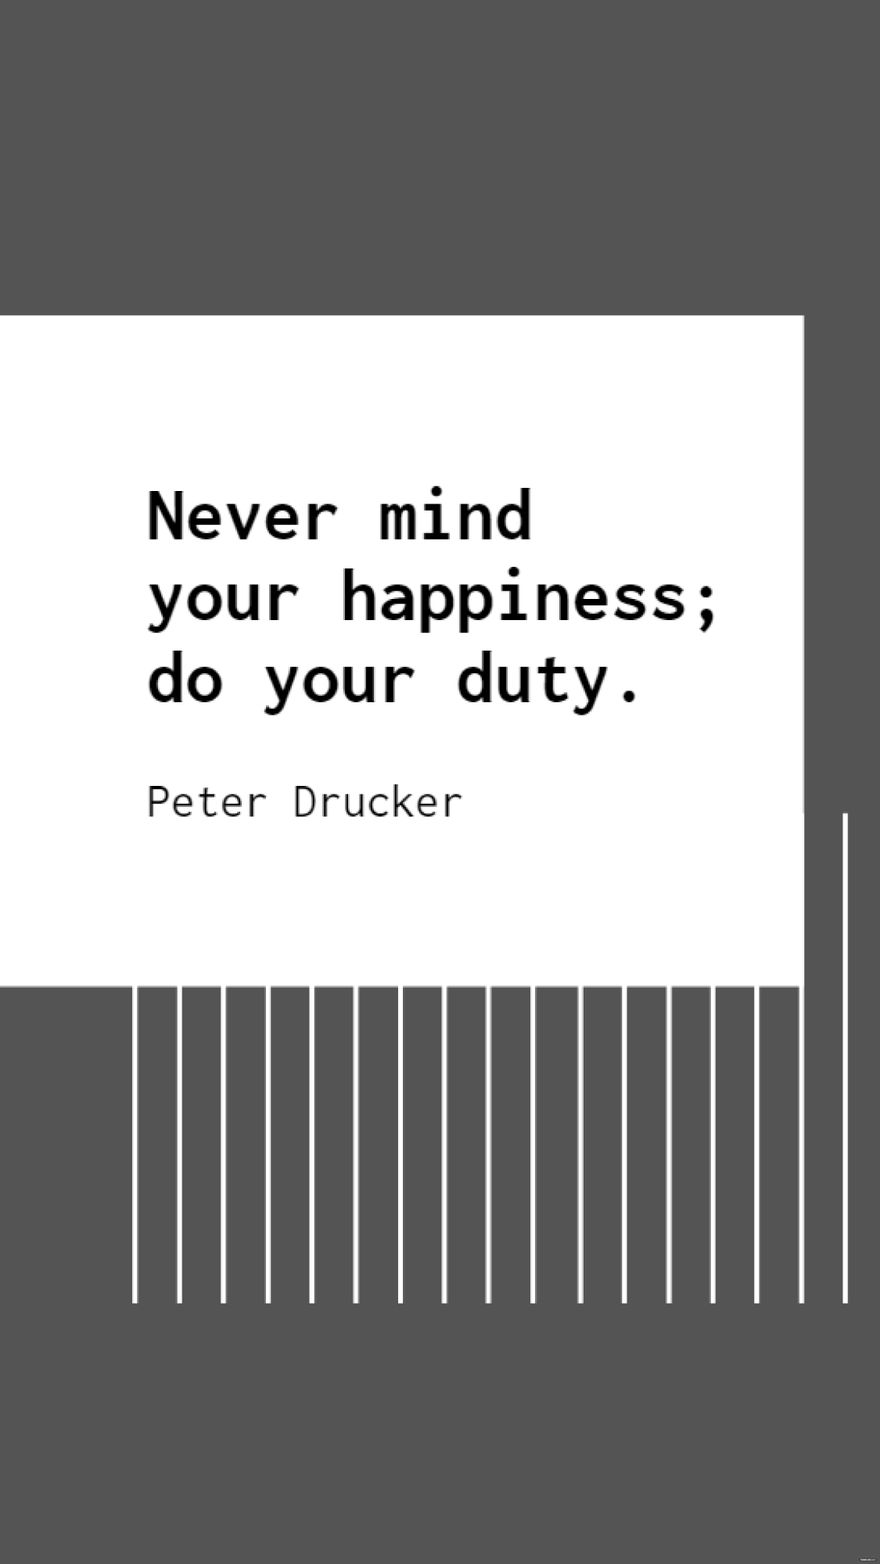 Peter Drucker - Never mind your happiness; do your duty.